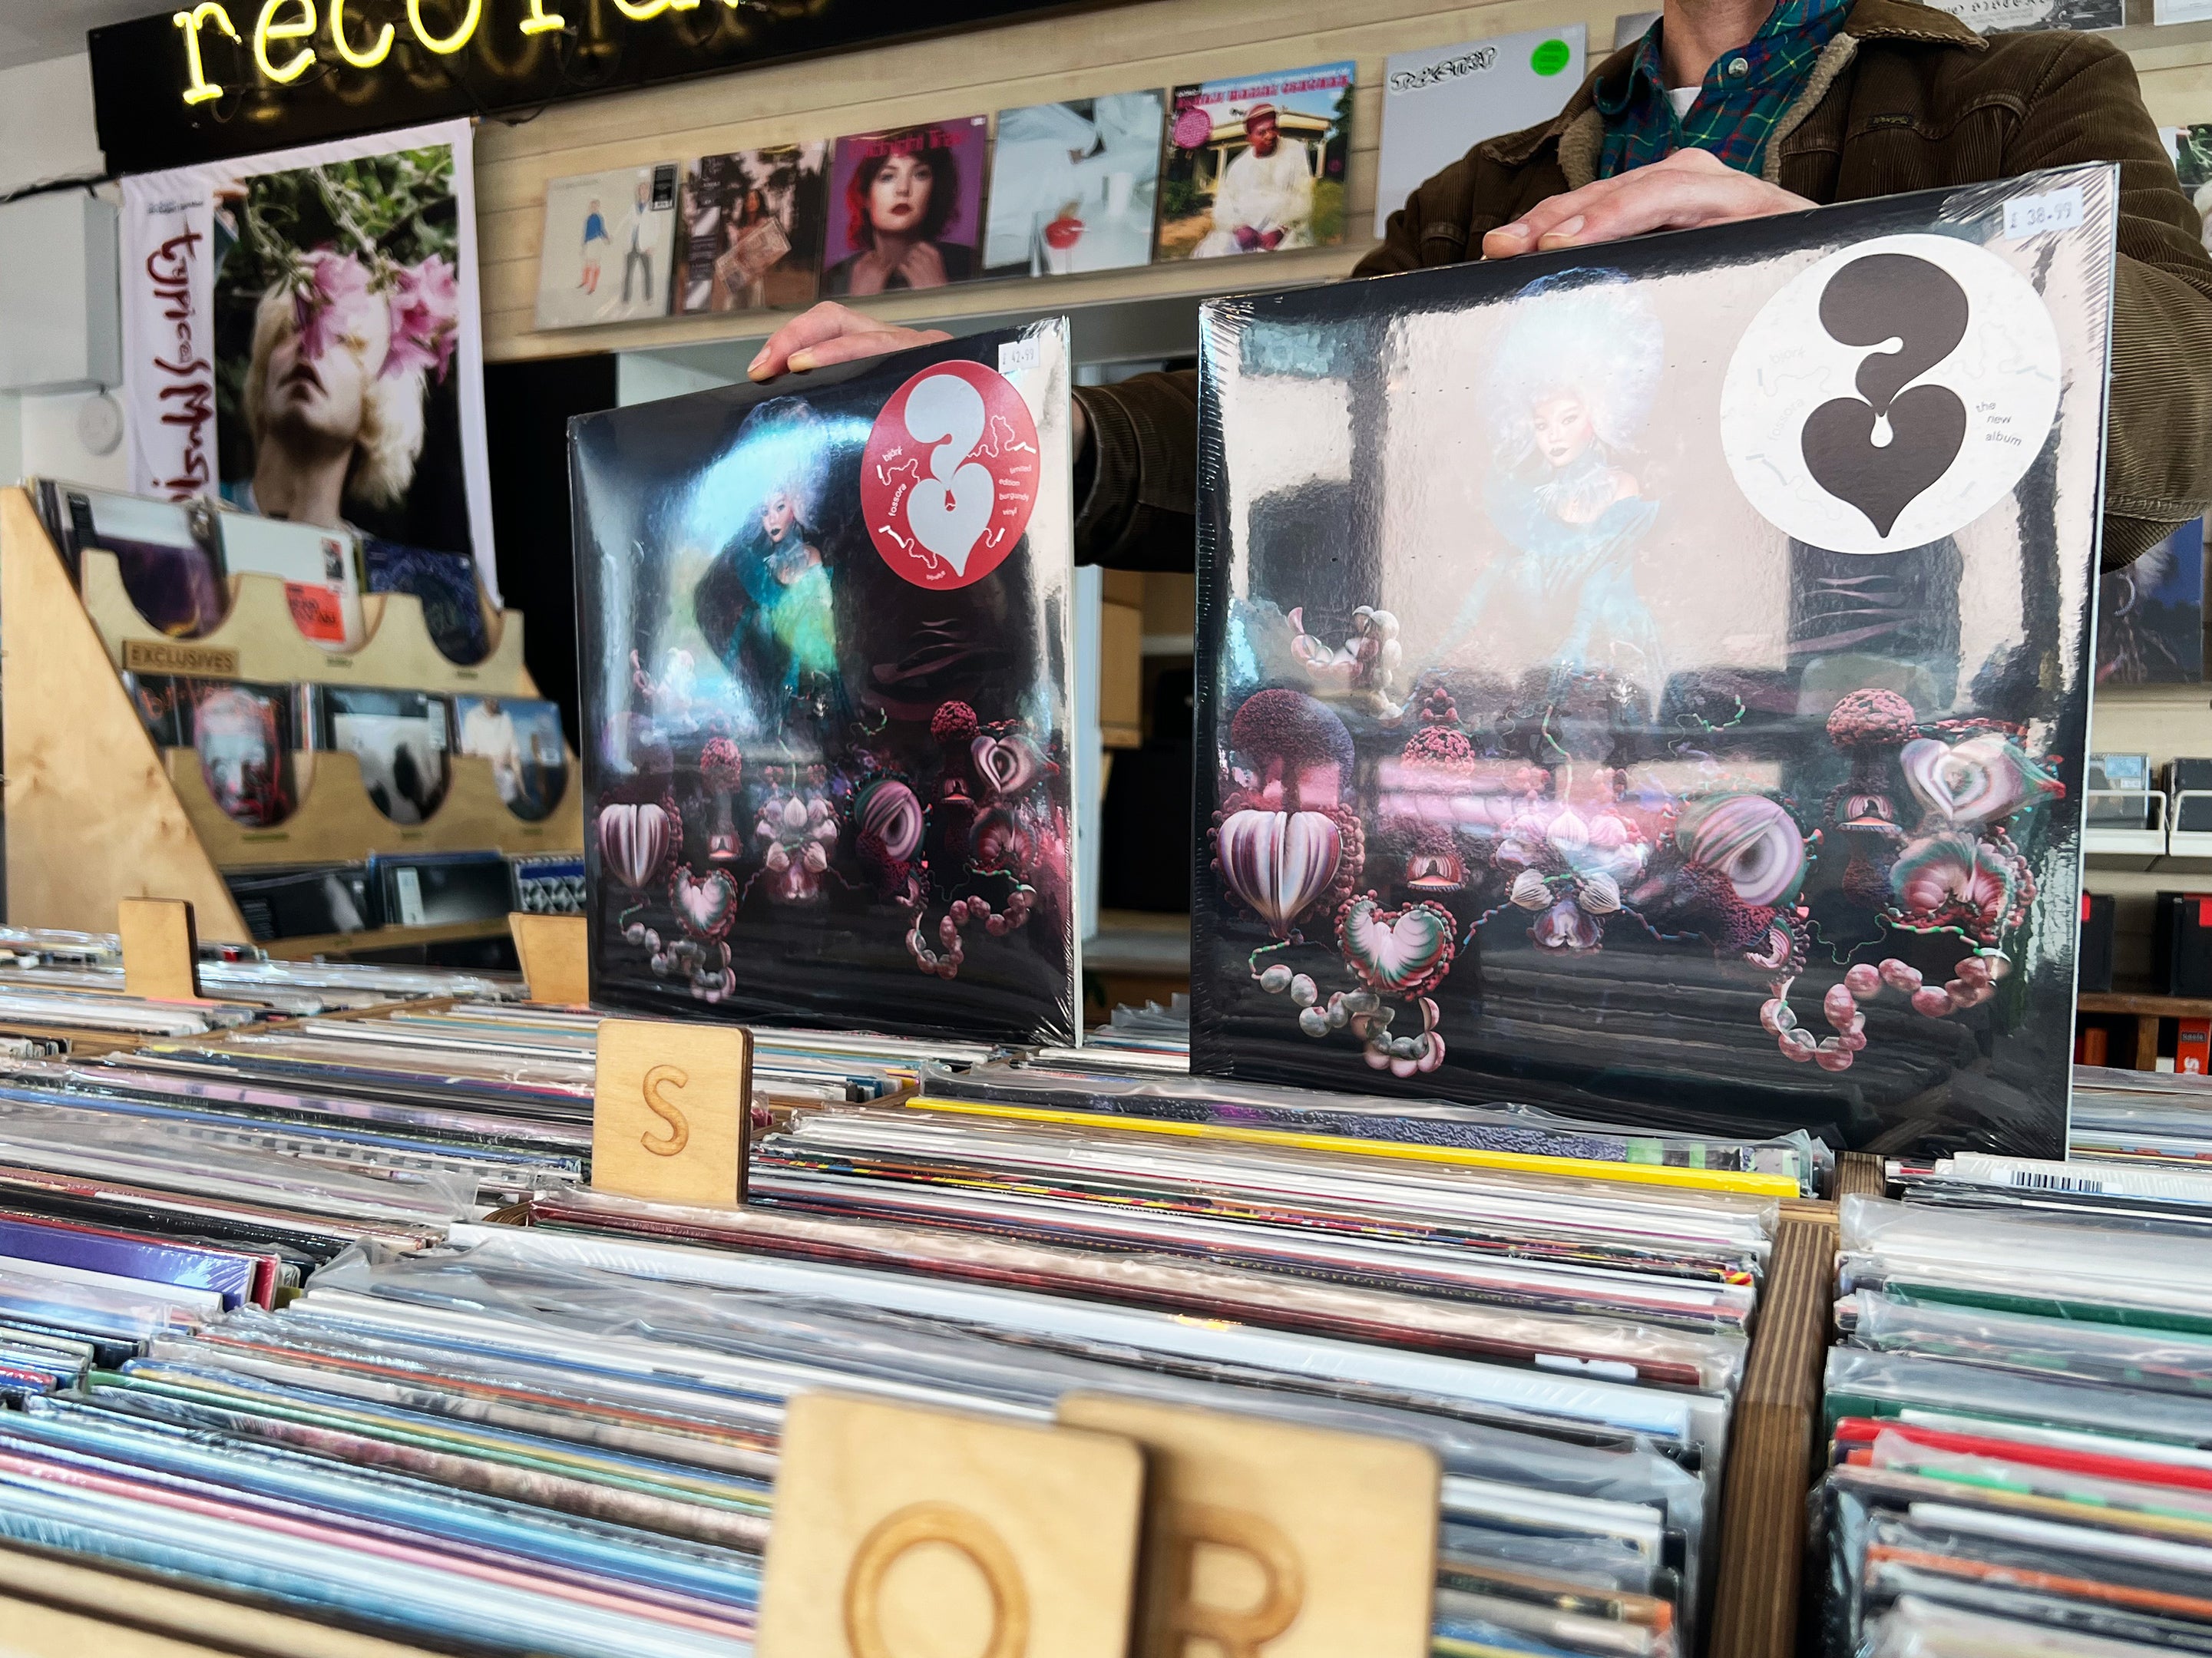 Records of the Week: Björk, Yeah Yeah Yeahs, Lambchop, Pixies, Shygirl, OFF! and High Vis.